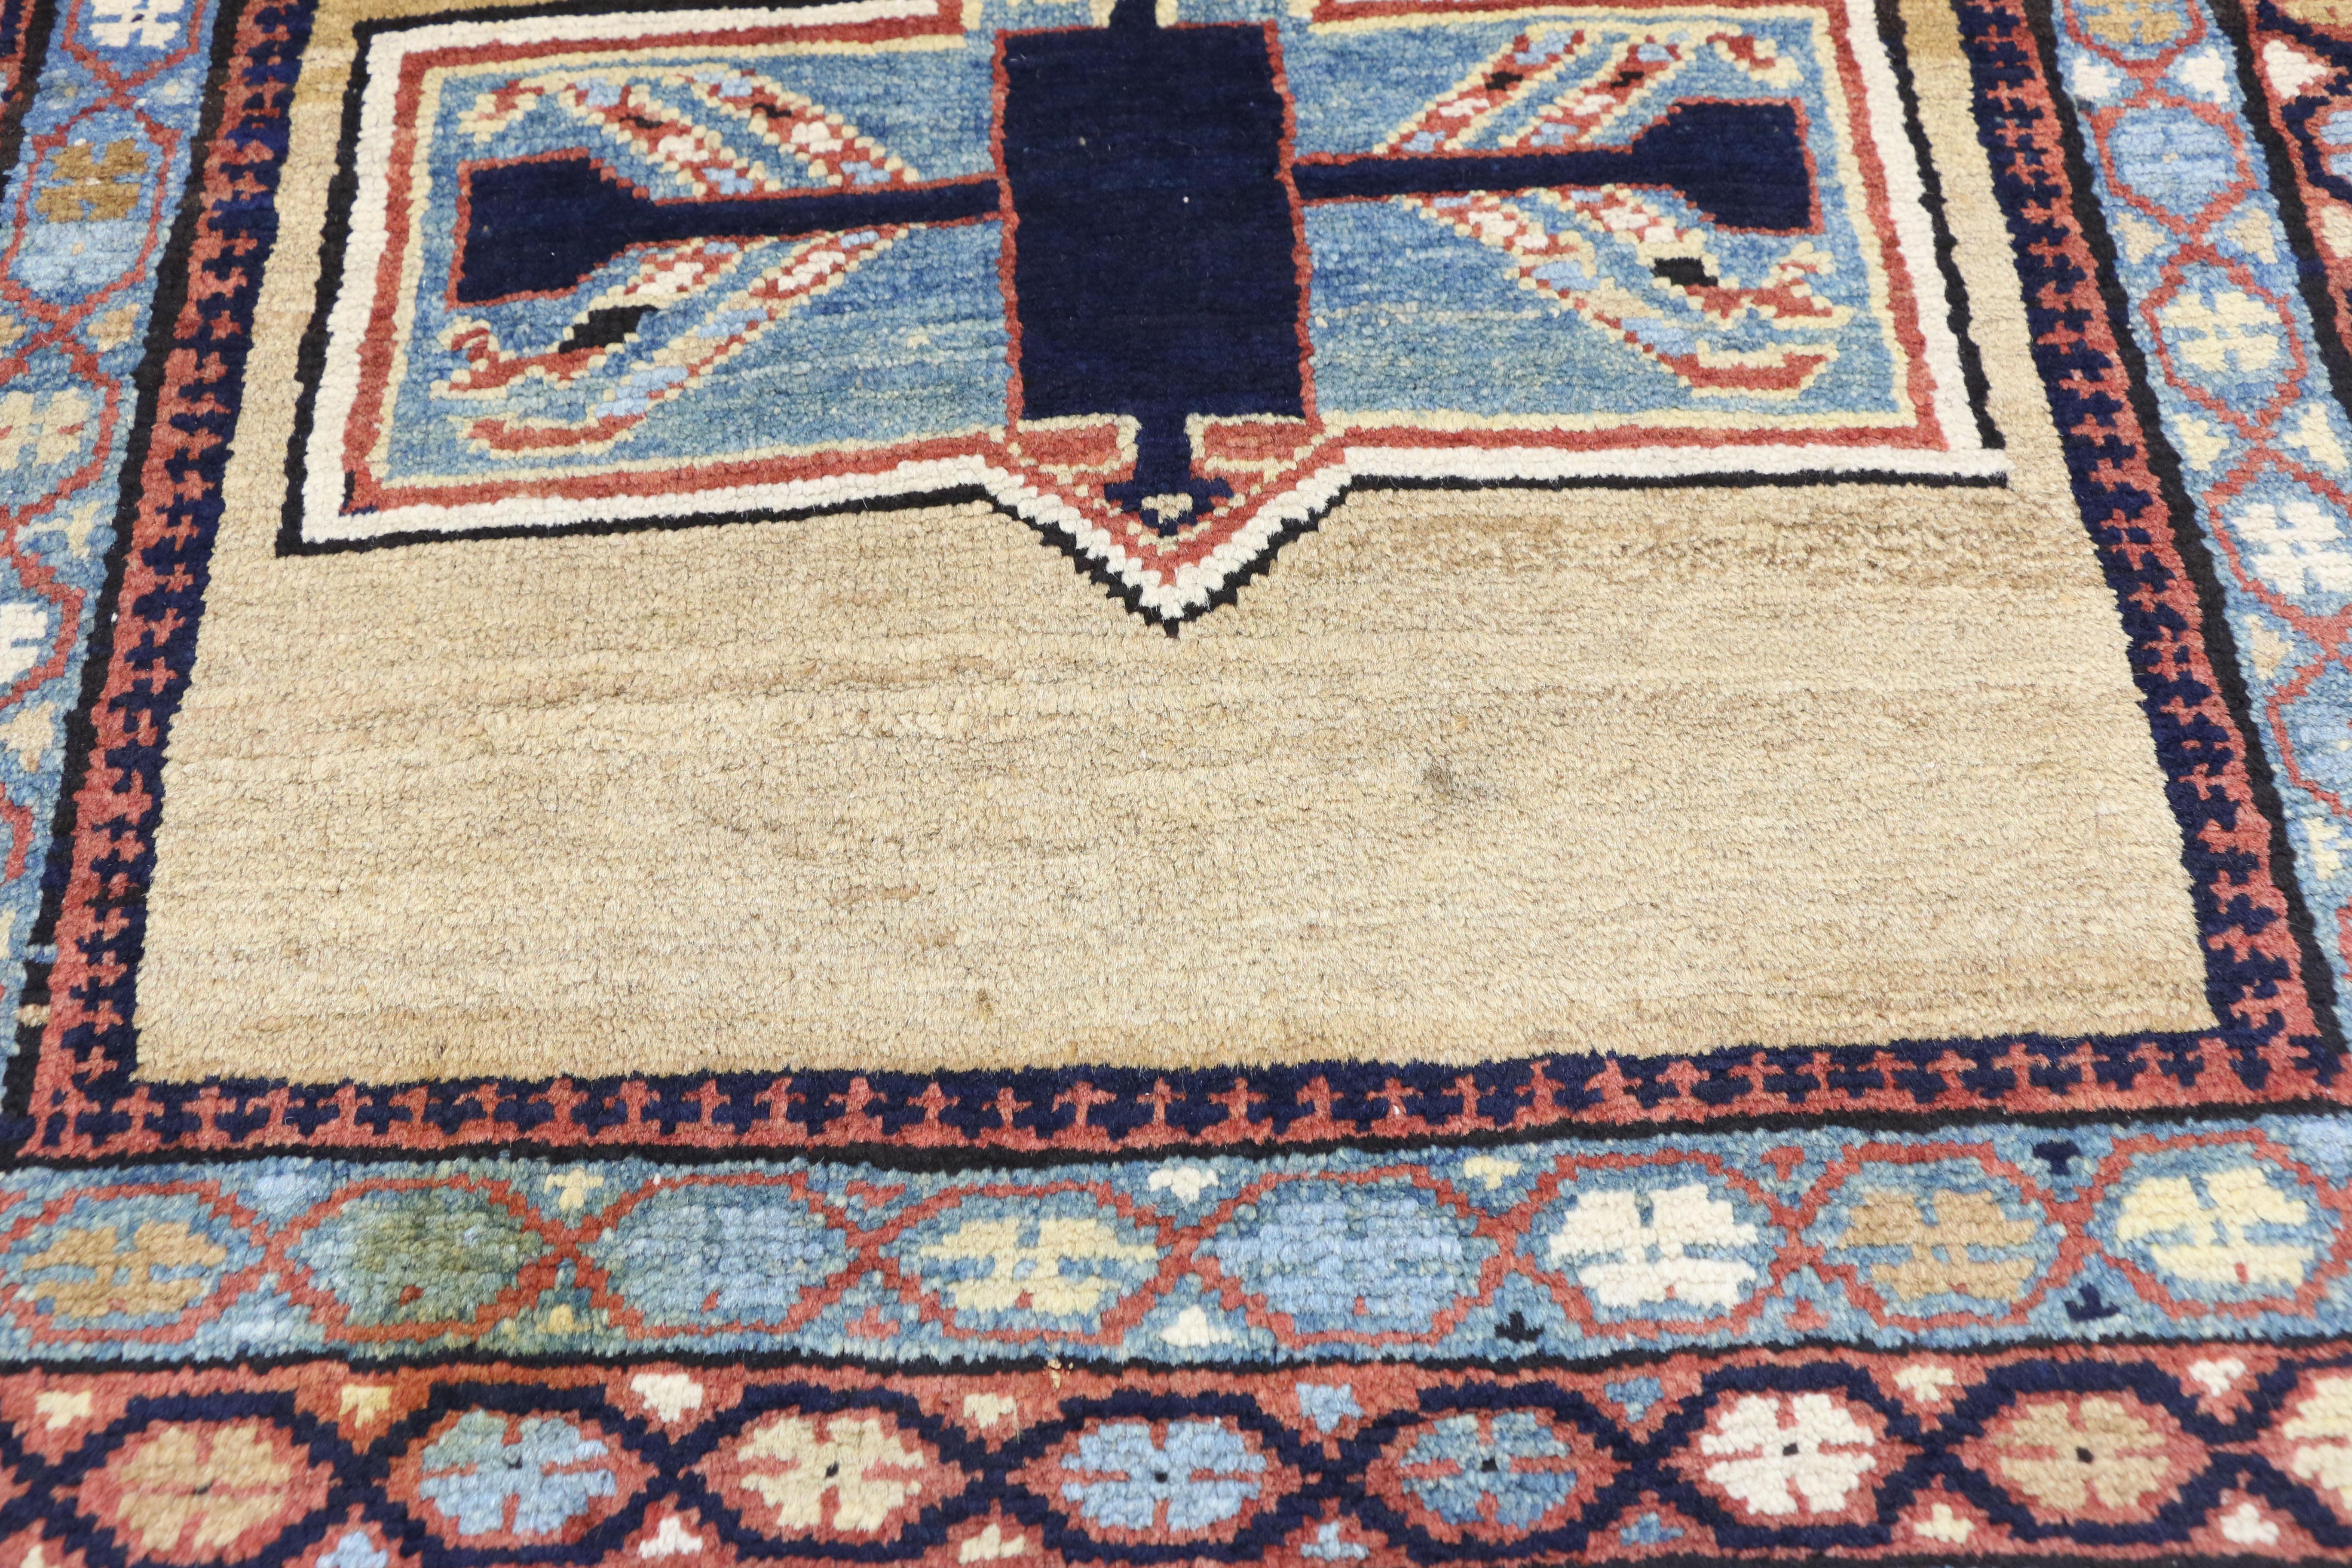 Antique Persian Azerbaijan Rug with Tribal Mid-Century Modern Style In Good Condition For Sale In Dallas, TX